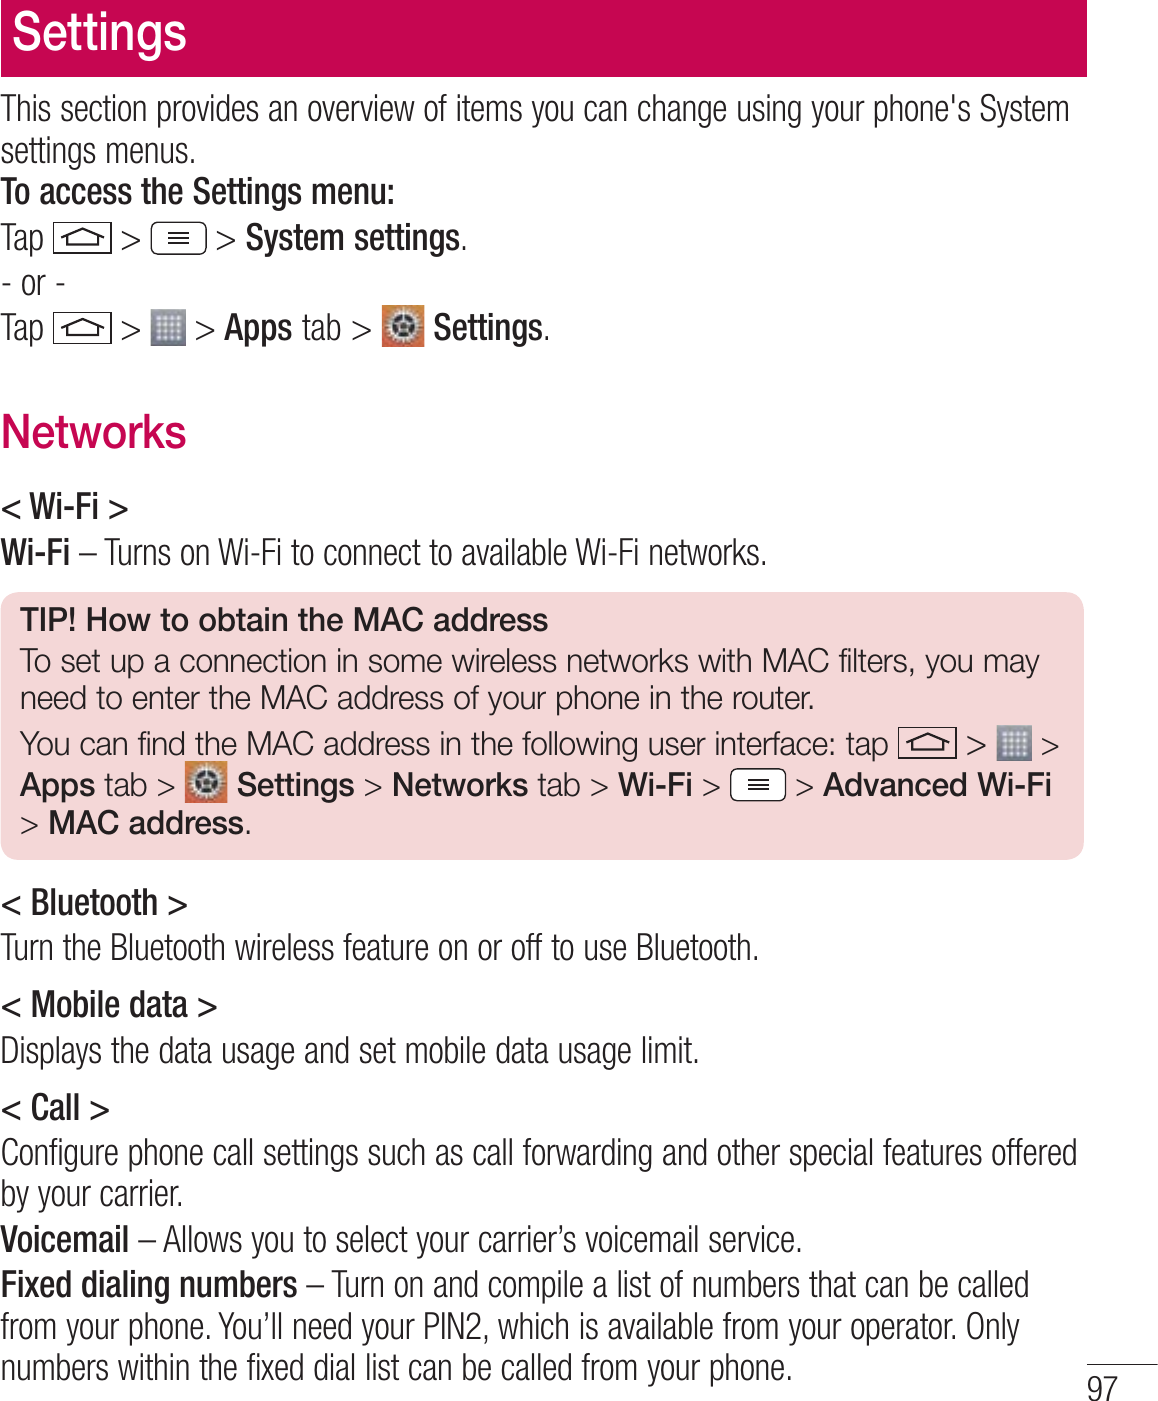 97SettingsThis section provides an overview of items you can change using your phone&apos;s System settings menus.  To access the Settings menu:Tap   &gt;  &gt; System settings.- or -Tap   &gt;  &gt; Apps tab &gt;   Settings. Networks&lt; Wi-Fi &gt;Wi-Fi – Turns on Wi-Fi to connect to available Wi-Fi networks.TIP! How to obtain the MAC addressTo set up a connection in some wireless networks with MAC filters, you may need to enter the MAC address of your phone in the router.You can find the MAC address in the following user interface: tap  &gt;  &gt; Apps tab &gt;  Settings &gt; Networks tab &gt; Wi-Fi &gt;   &gt; Advanced Wi-Fi &gt; MAC address.&lt; Bluetooth &gt;Turn the Bluetooth wireless feature on or off to use Bluetooth.&lt; Mobile data &gt;Displays the data usage and set mobile data usage limit.&lt; Call &gt;Configure phone call settings such as call forwarding and other special features offered by your carrier.Voicemail – Allows you to select your carrier’s voicemail service.Fixed dialing numbers – Turn on and compile a list of numbers that can be called from your phone. You’ll need your PIN2, which is available from your operator. Only numbers within the fixed dial list can be called from your phone.